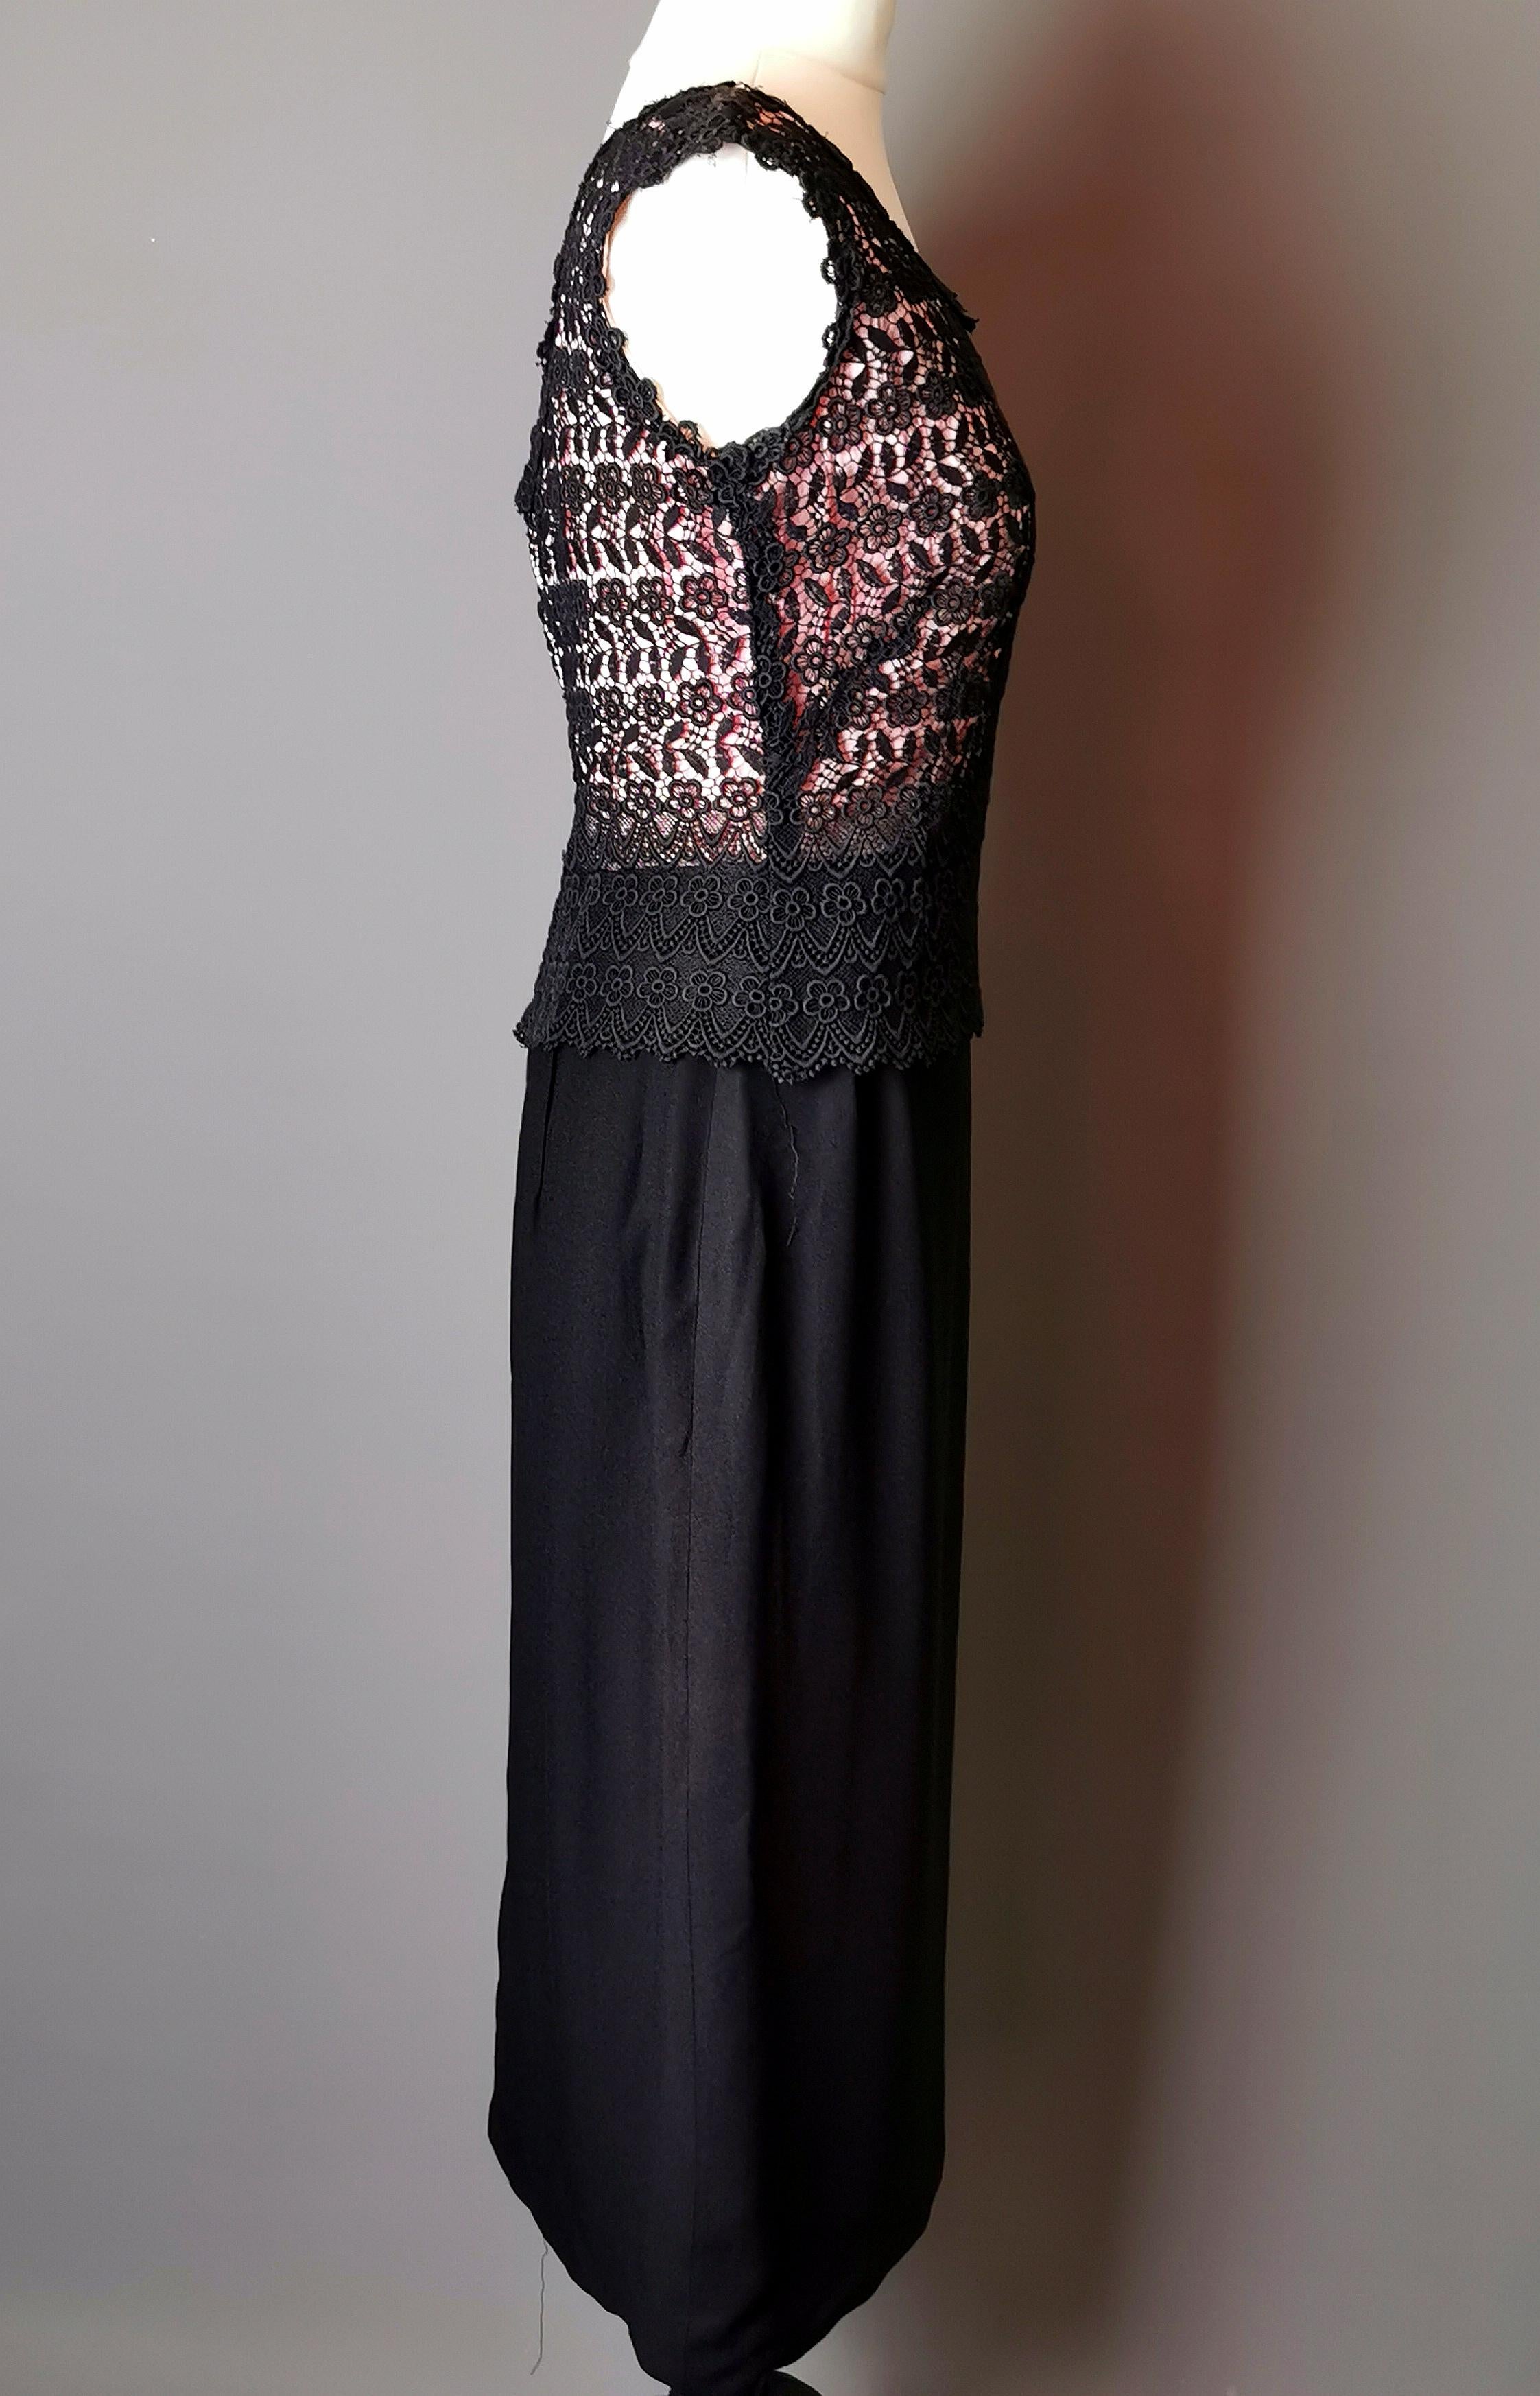 Women's Vintage 1970s Guipure lace overlay dress, Black and Pink  For Sale